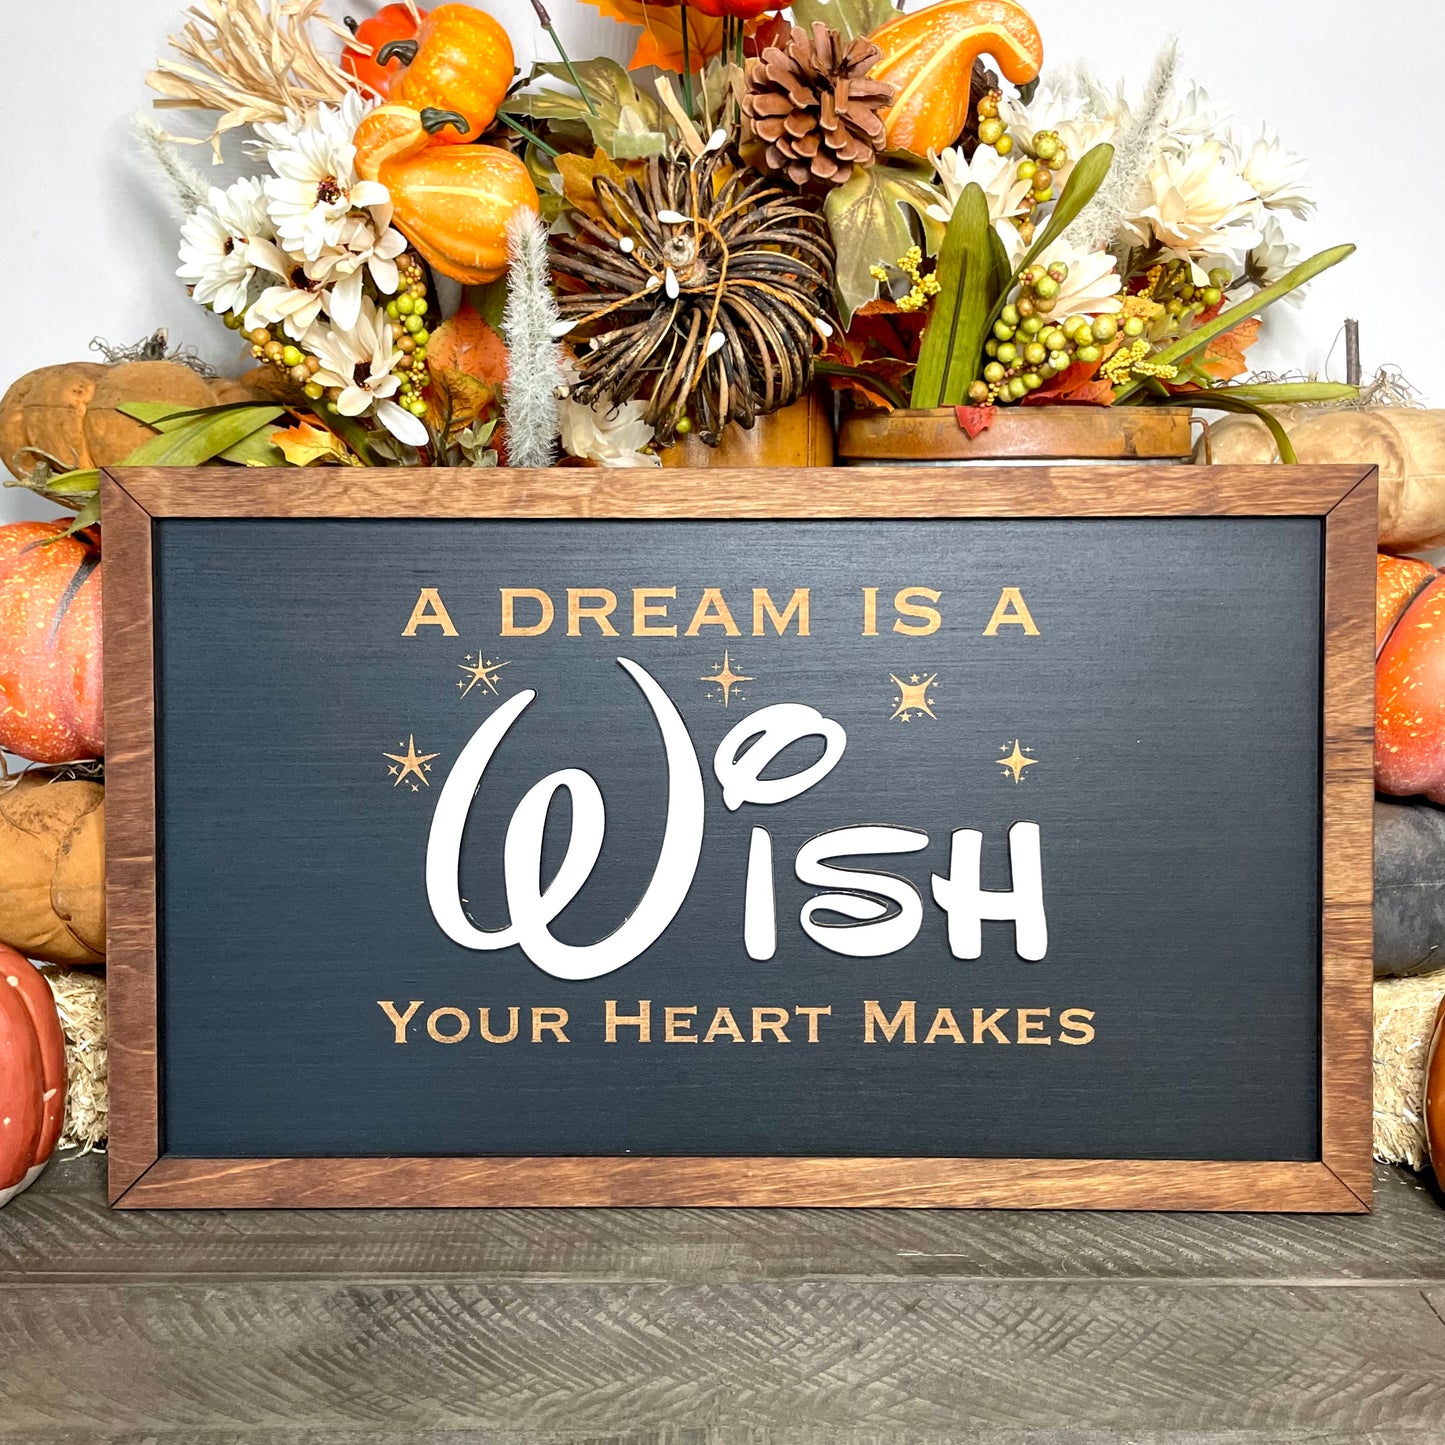 A Dream Is A Wish Your Heart Makes Sign